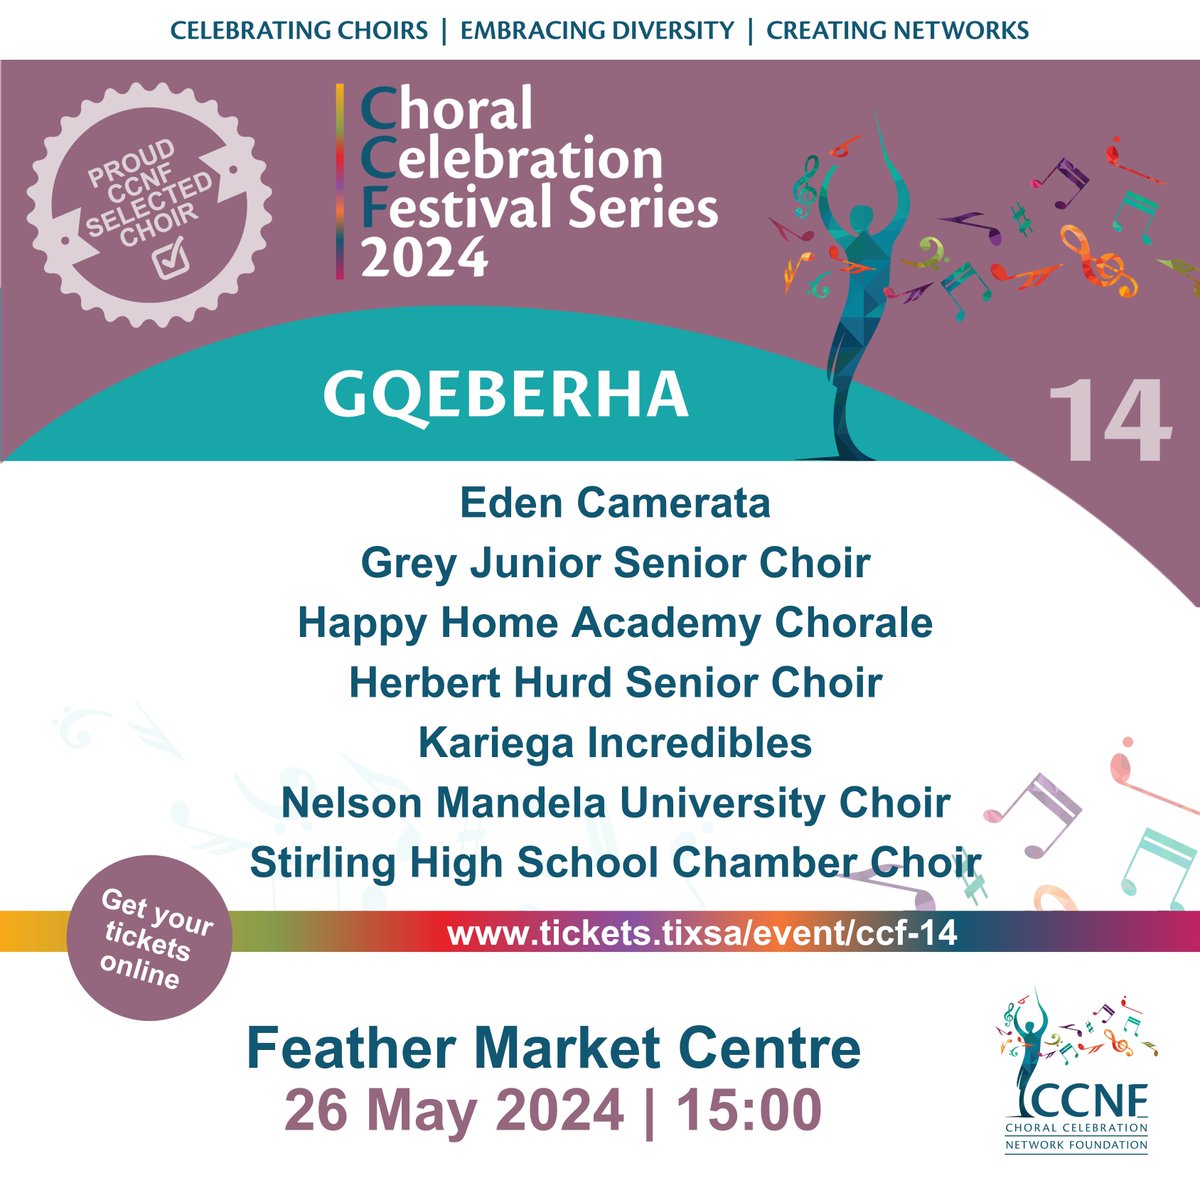 Brace yourselves for an afternoon of pure magic! Our choir is thrilled to announce our participation in the Choral Celebration Festival 14! Date: 26 May 2024 Time: 15:00 Venue: Feather Market Centre Ticket Link: tickets.tixsa.co.za/event/festival… Choral Celebration Network